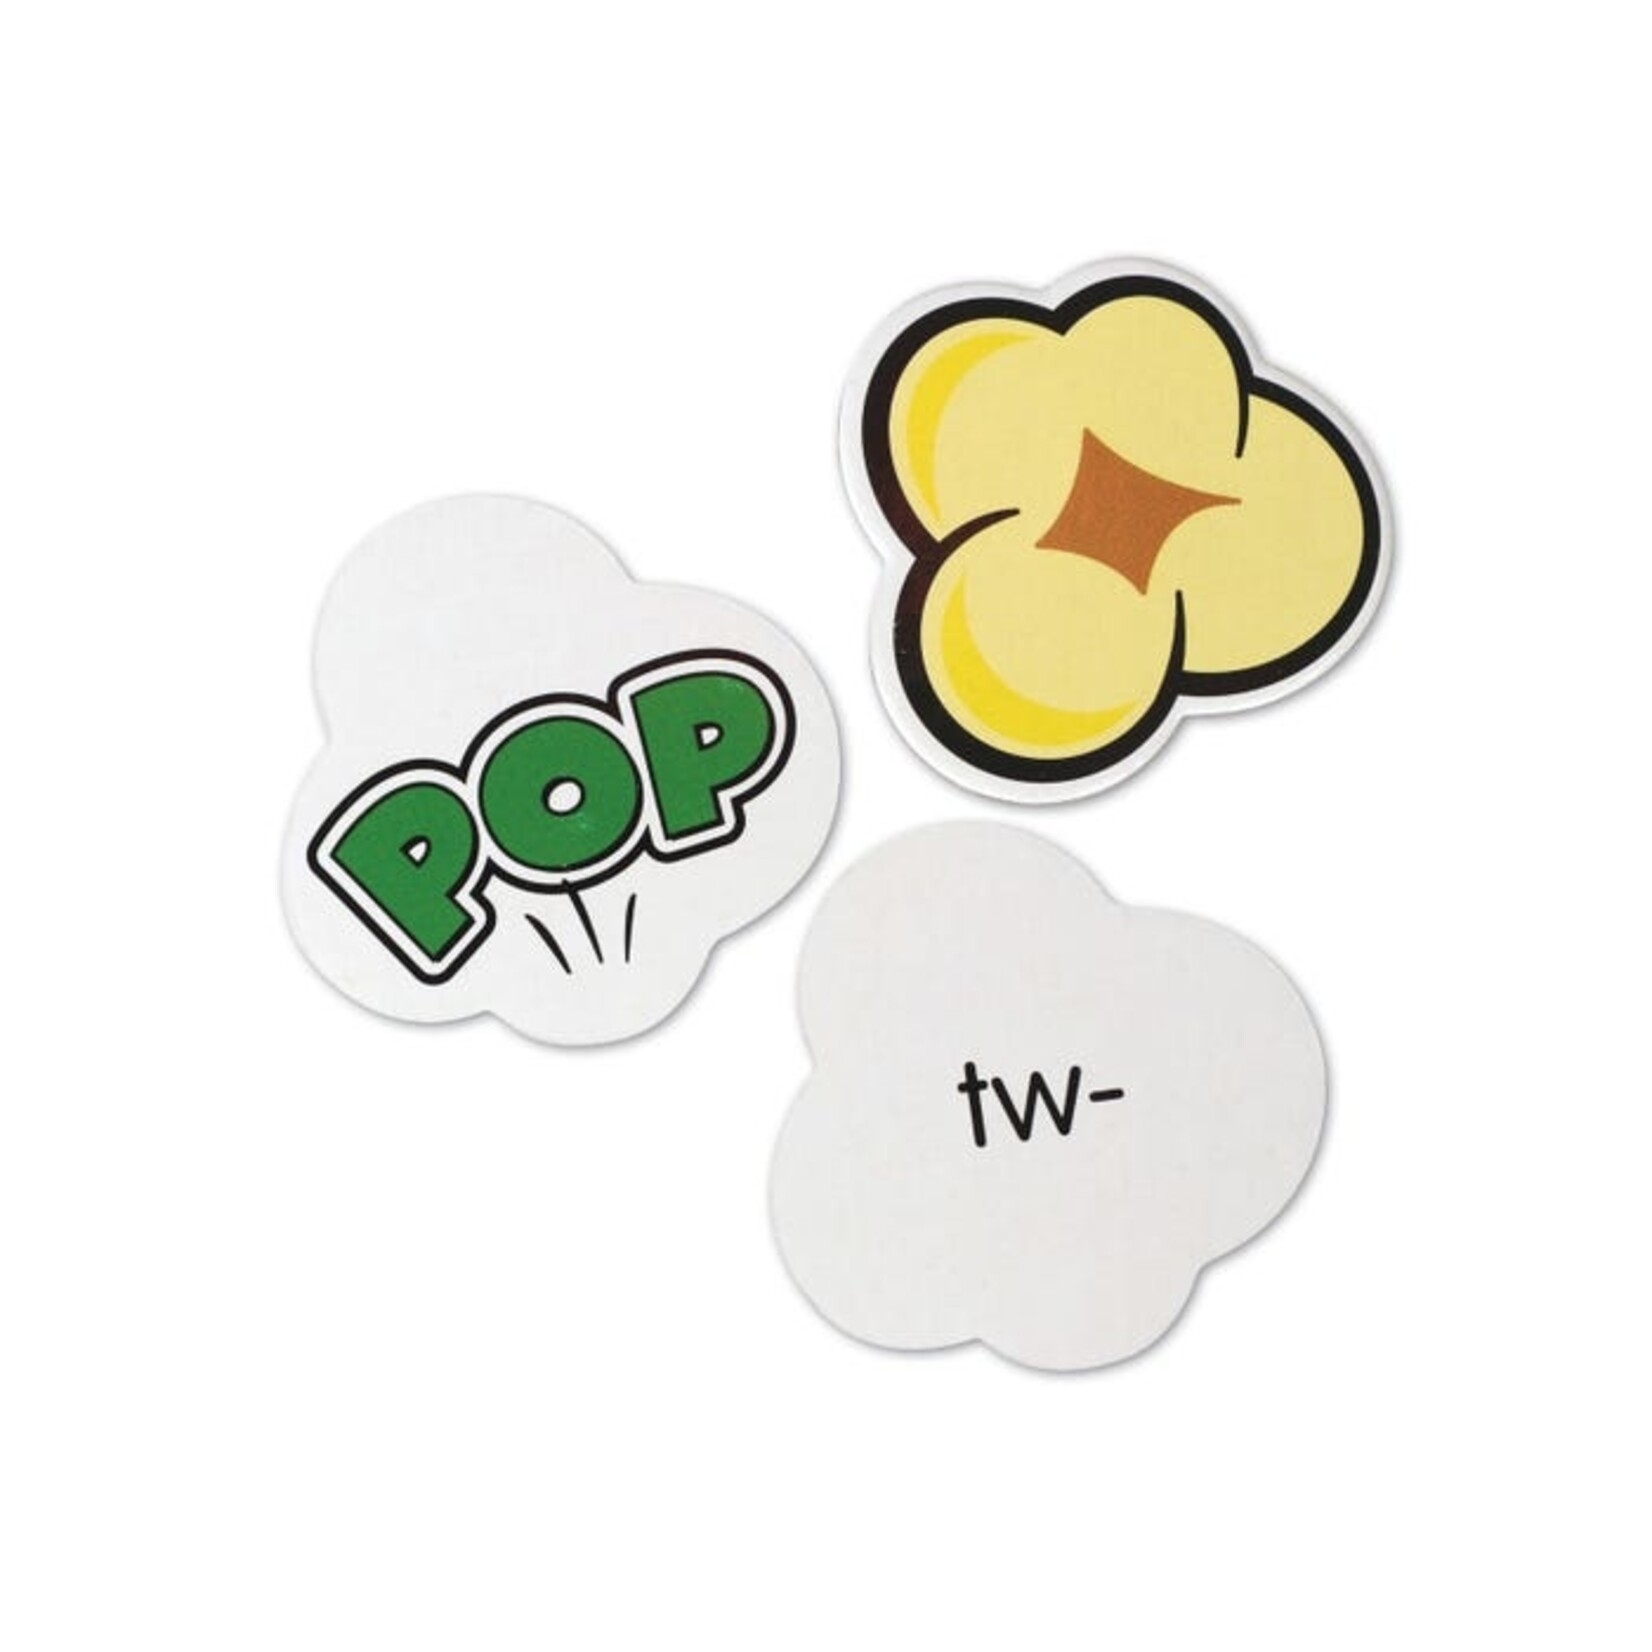 LEARNING RESOURCES INC POP for Blends™ Game